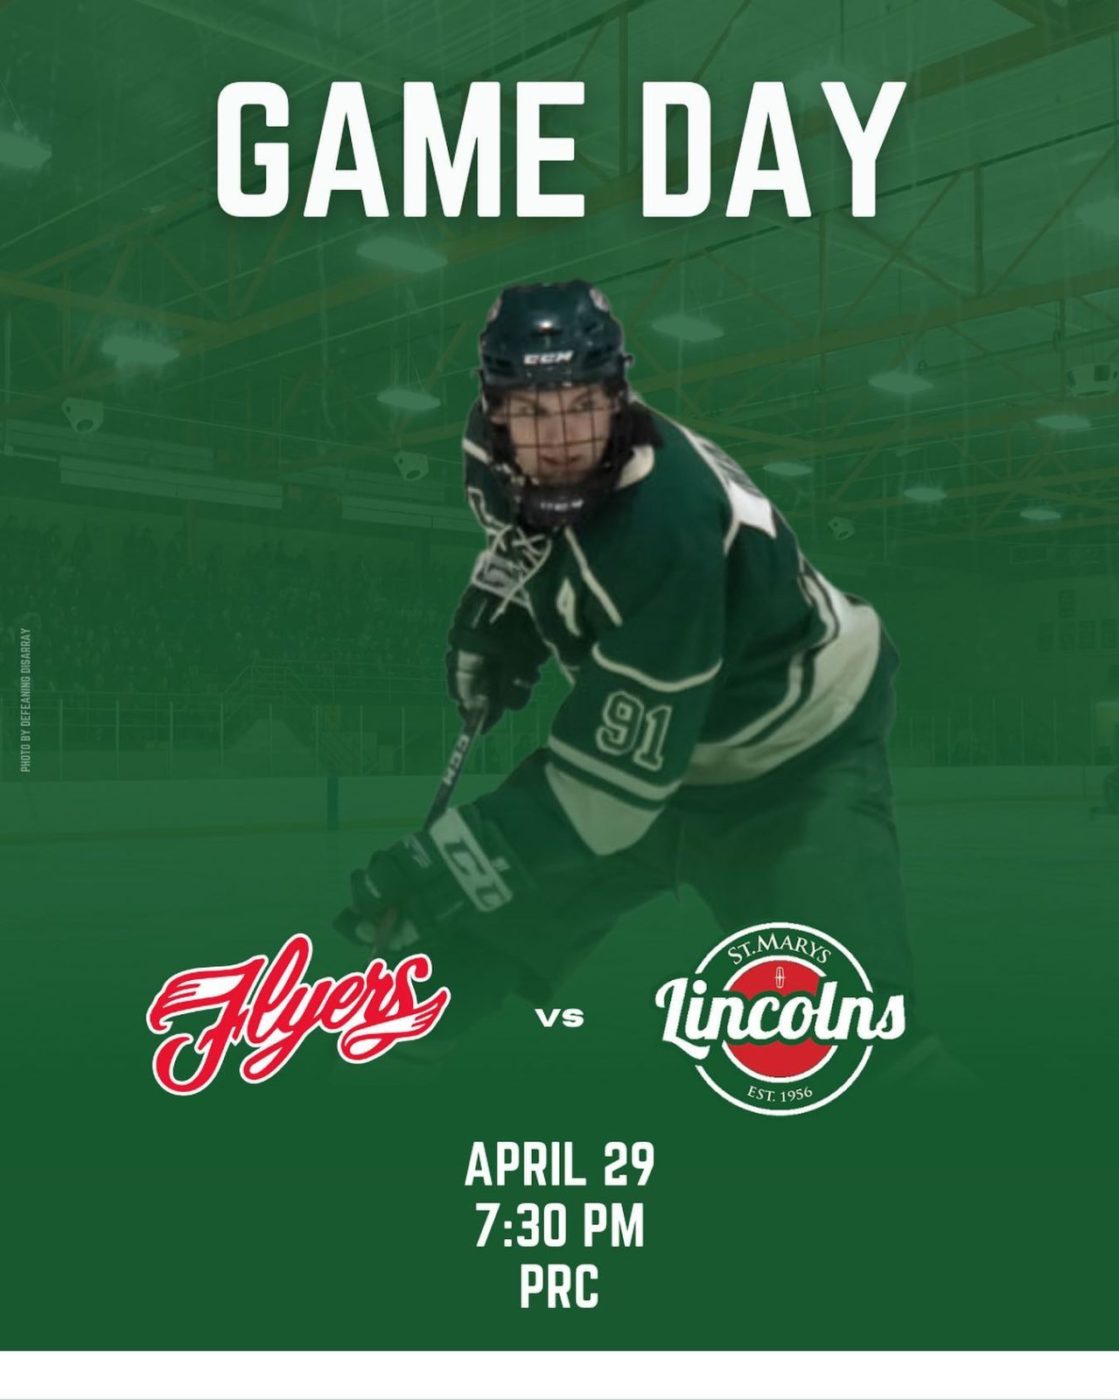 GAME DAY - Lincs host the Leamington Flyers tonight for game 6 of the Western Conference Semi-Finals! Bring the noise and let’s pack the PRC for the biggest game of the year #GoLincsGo